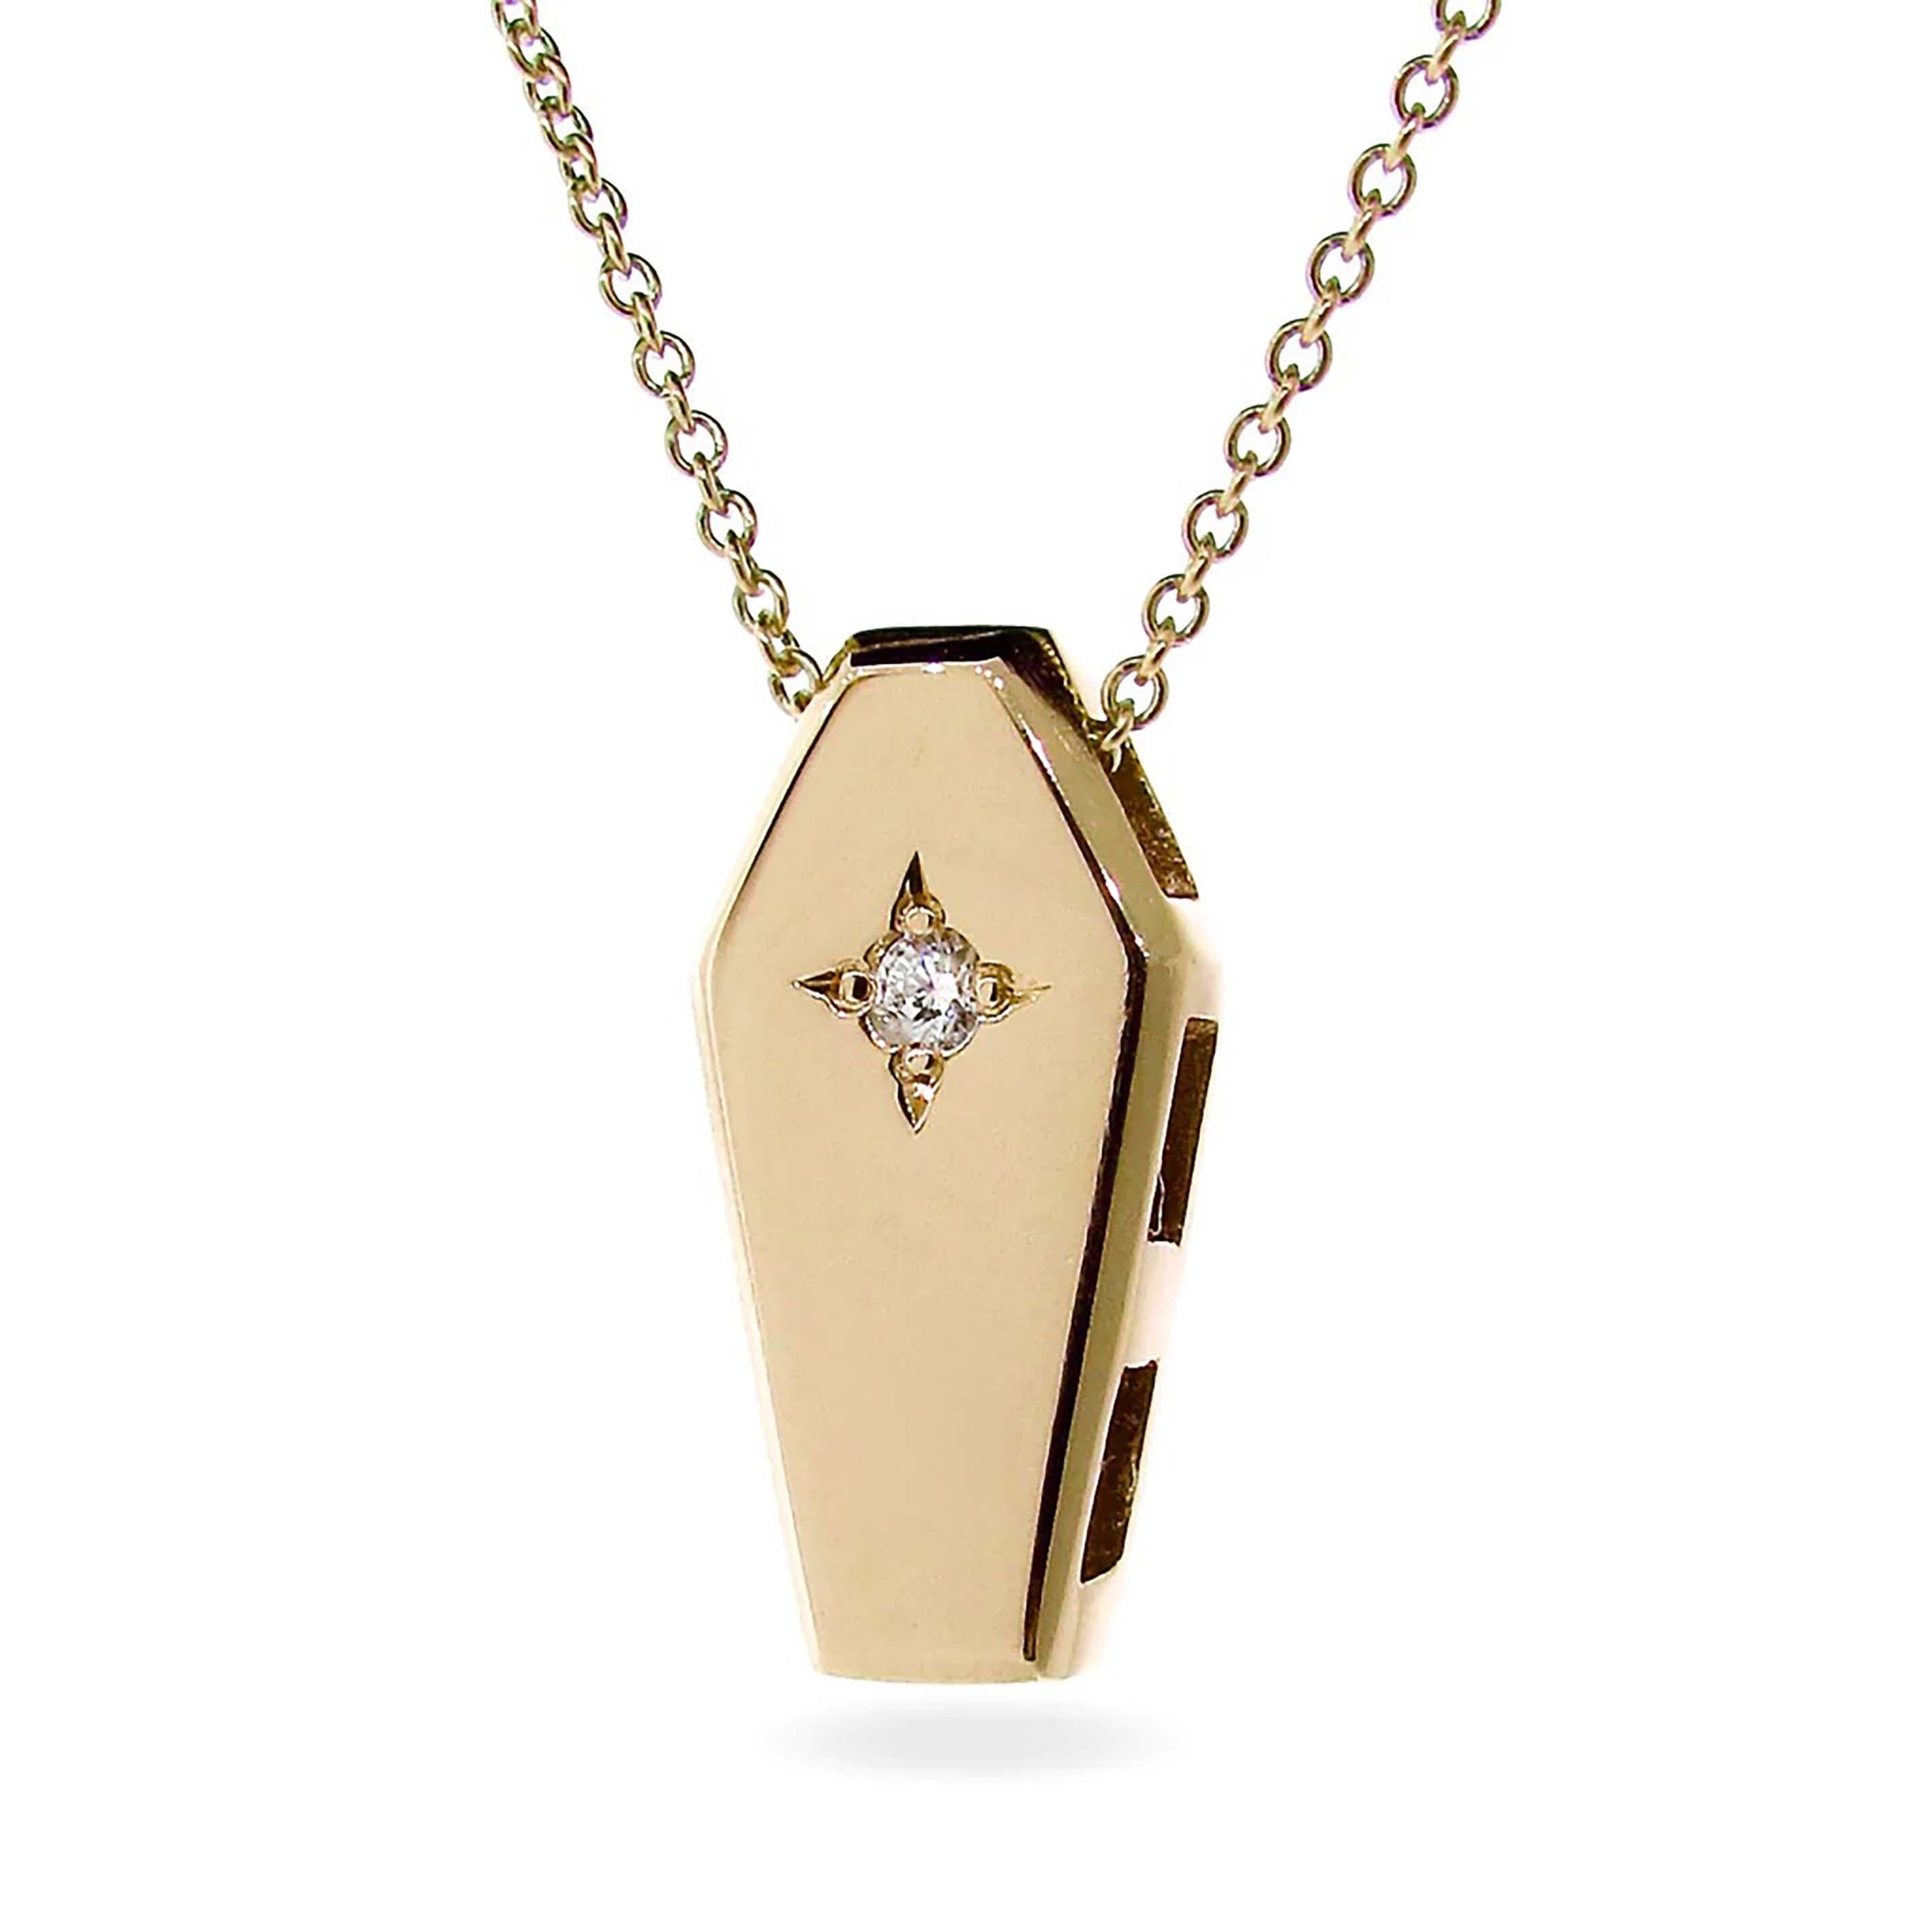 our unique Yellow Gold Diamond Coffin Pendant, is crafted from solid 9k Yellow Gold and a natural White star set Diamond., and hangs from a dainty 45cm 9k yellow gold cable chain, This exquisite piece captures a timeless sentiment of mortality, a